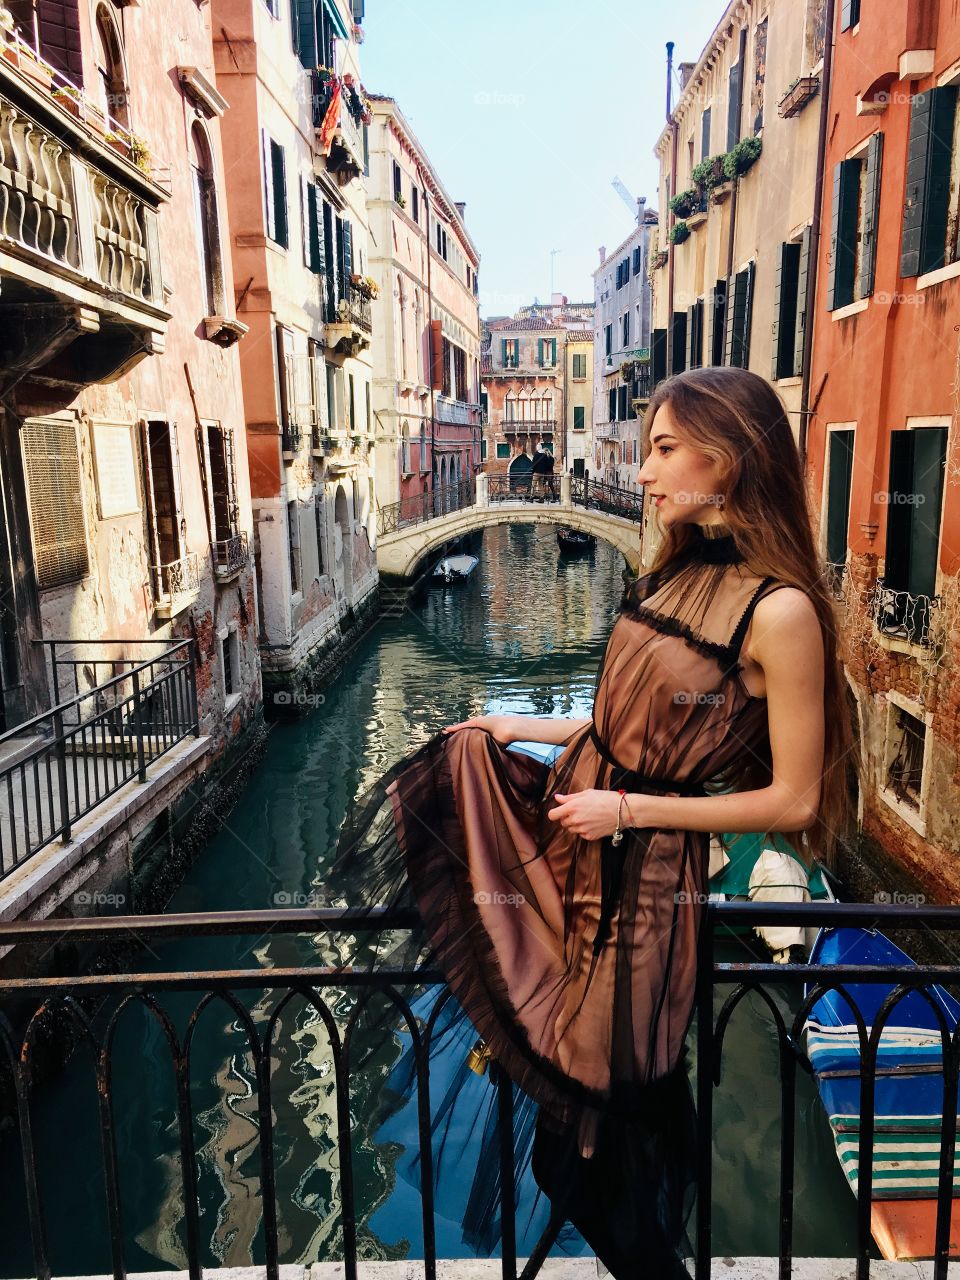 Fashion photo shooting in picturesque city Venice, Italy. Fashion brand, girl in a long dress, Grand canal, Gondola, Architecture, History, Pandora, Fashionblog, Travelblog, Warm colors, Adriatic sea, 2019.